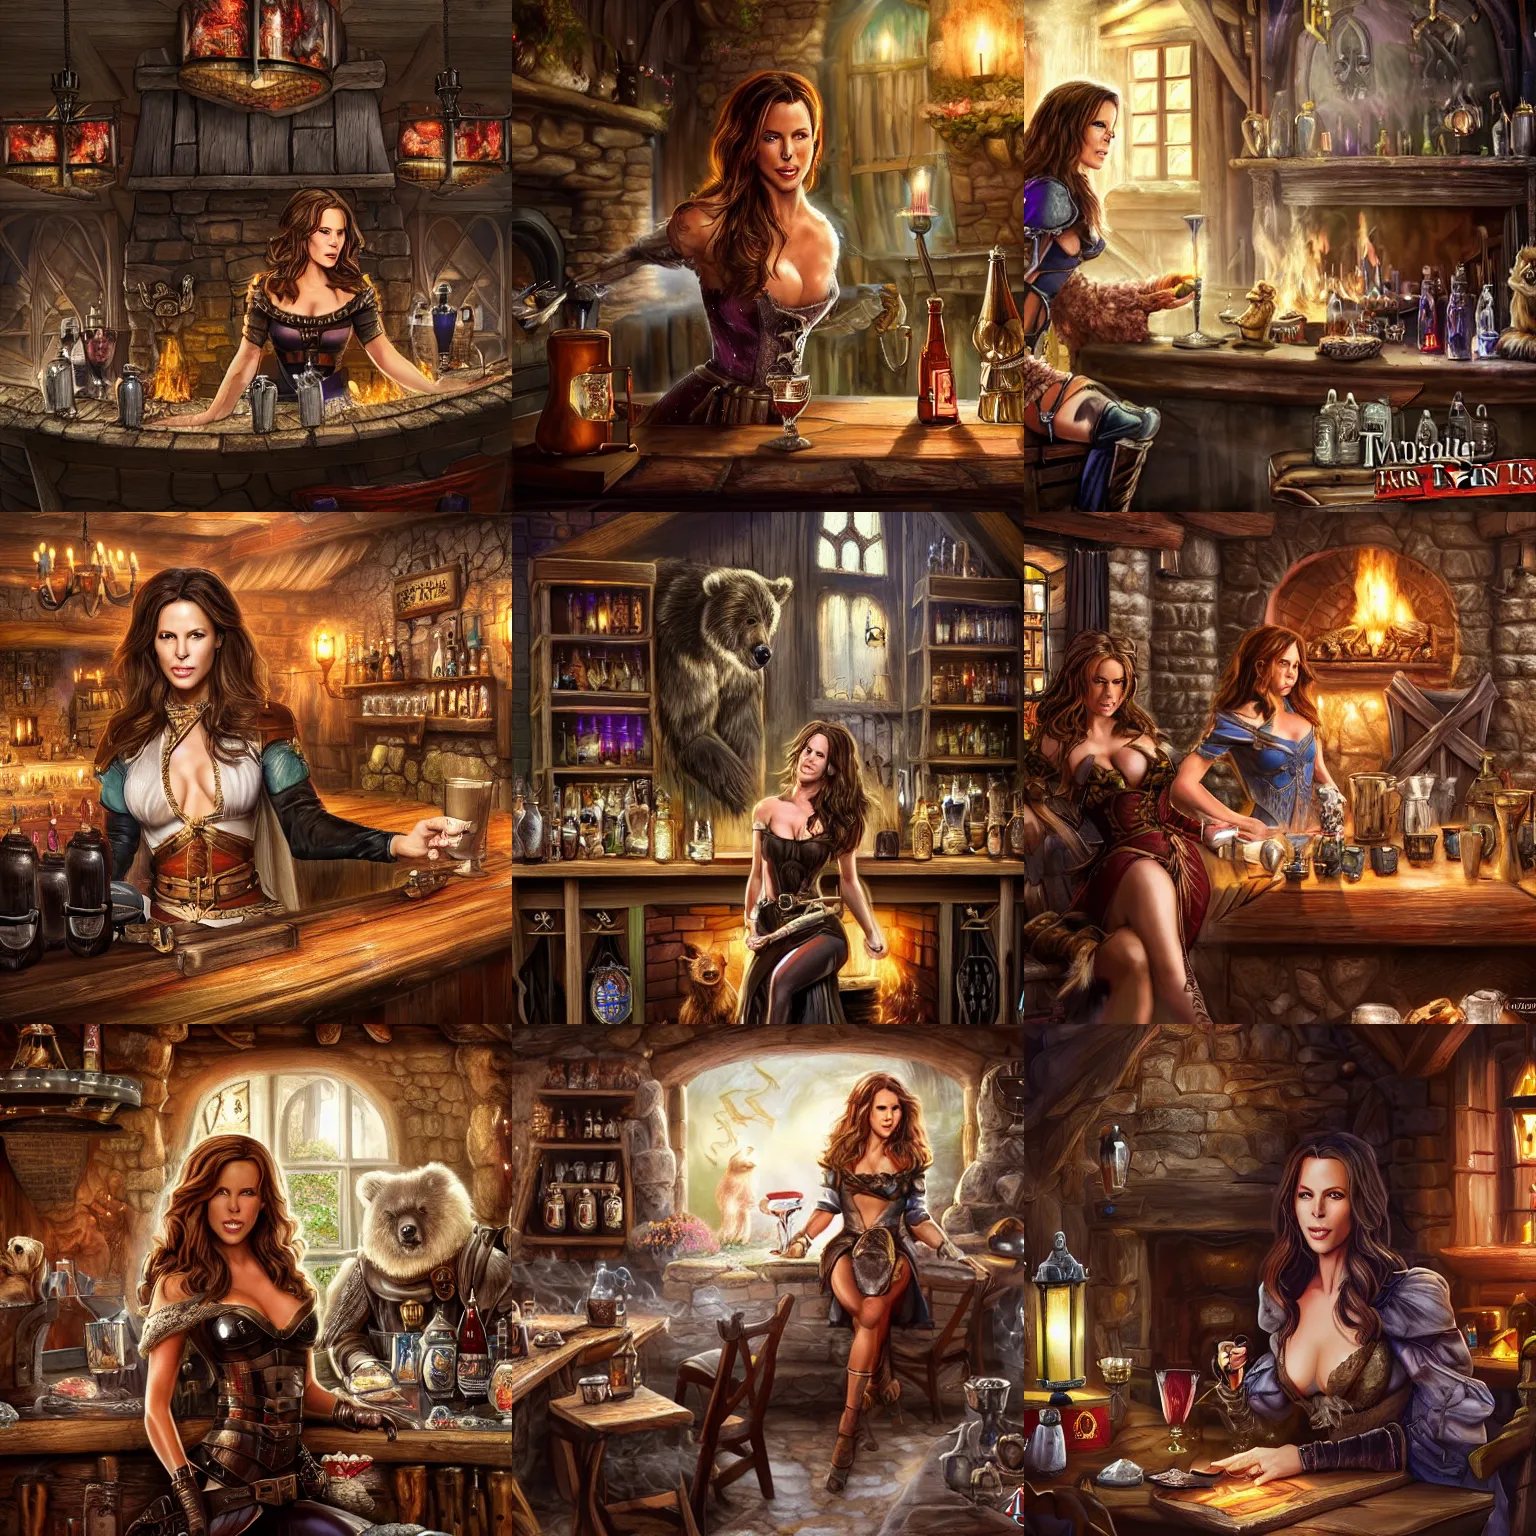 Prompt: kate beckinsale weared as paladine, sit in fantasy tavern near fireplace, behind bar deck with bear mugs, medieval dnd, colorfull digital fantasy art, 4k